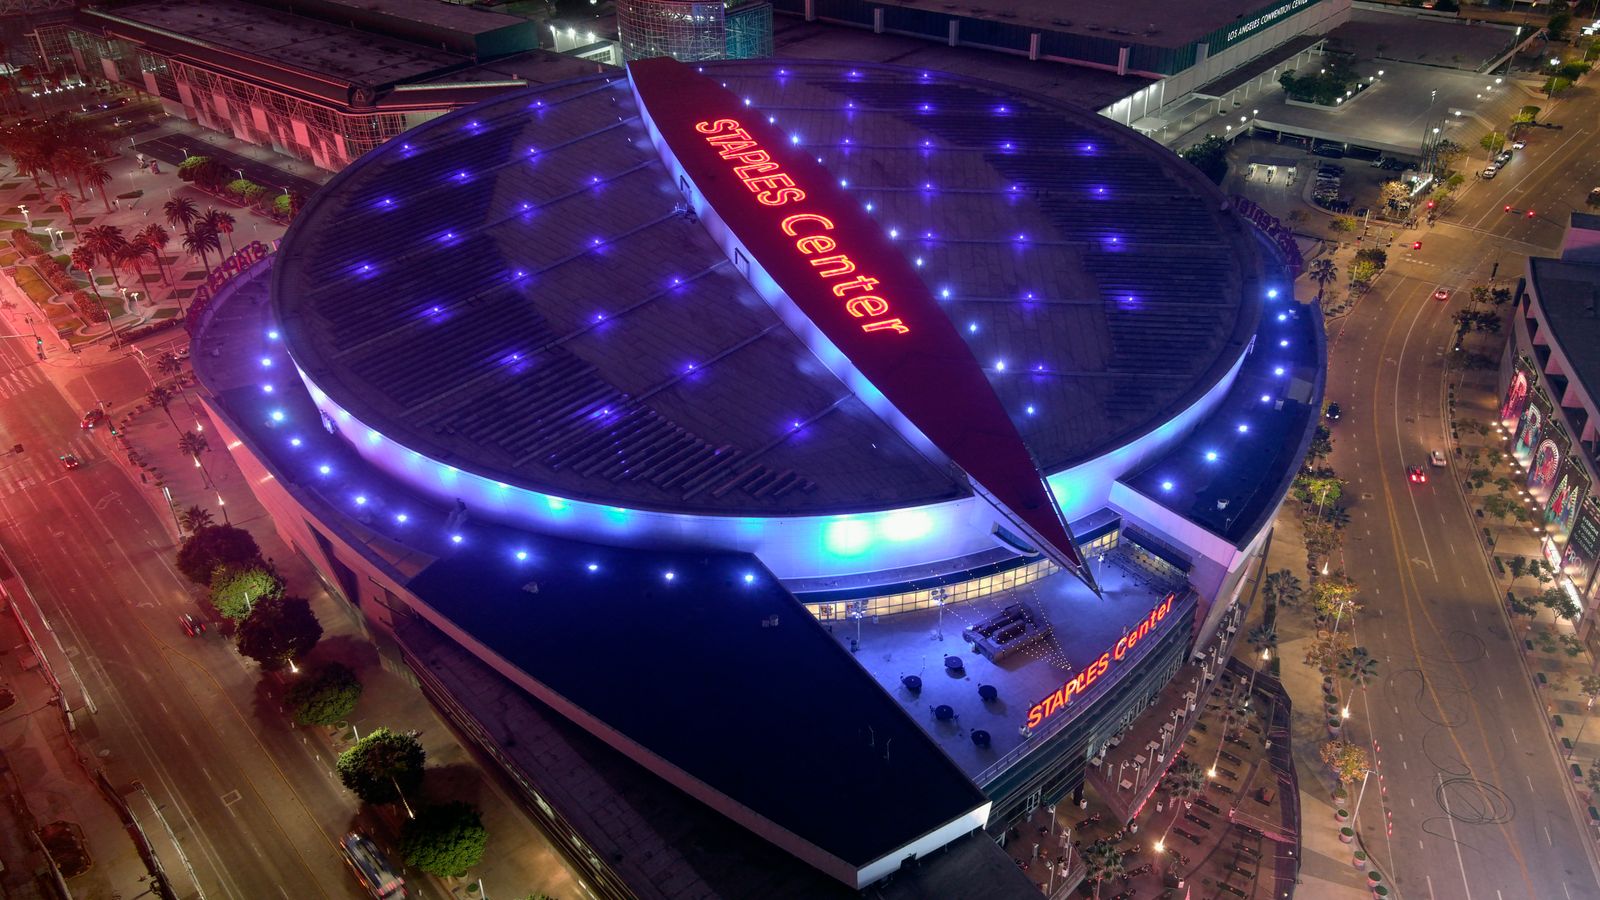 Los Angeles Lakers and Clippers' home arena Staples Center set to be